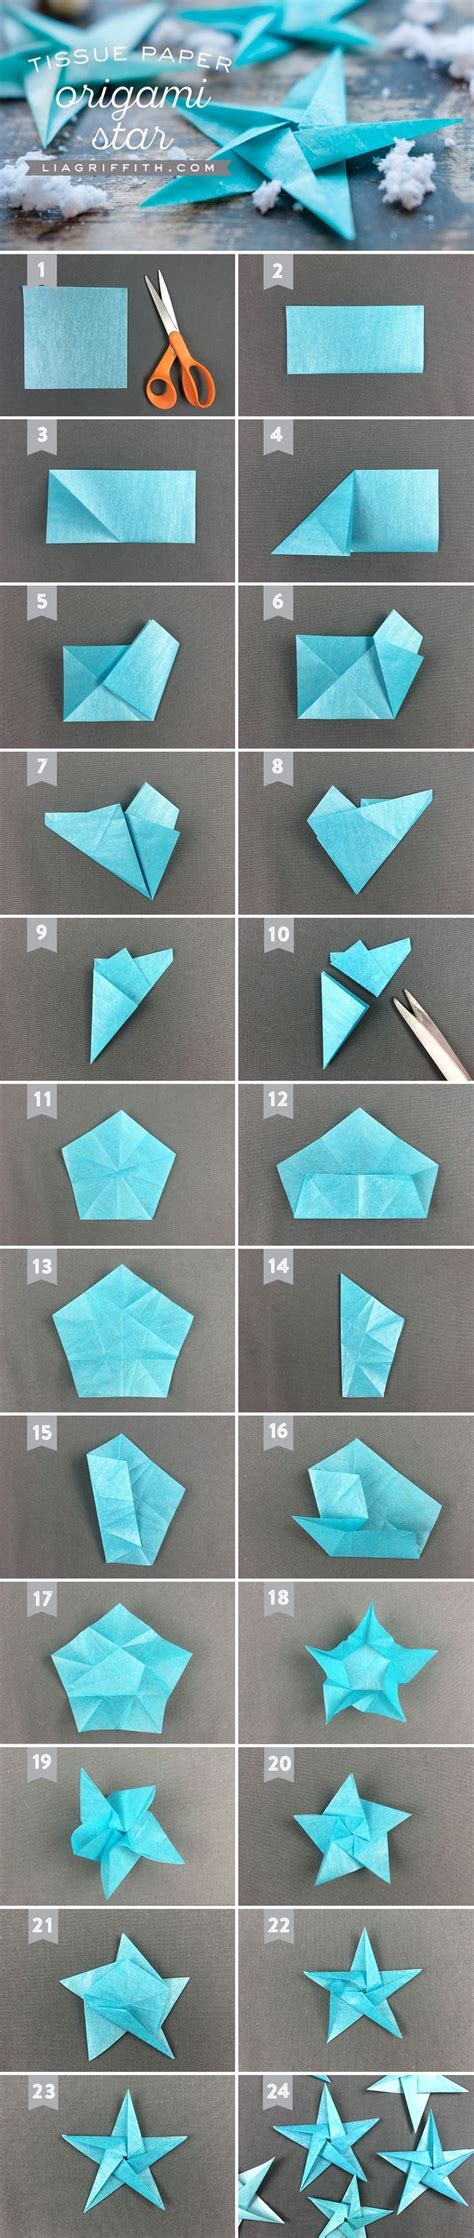 One of our favourite christmas crafts. Tissue Star Origami Christmas Ornaments - Lia Griffith ...